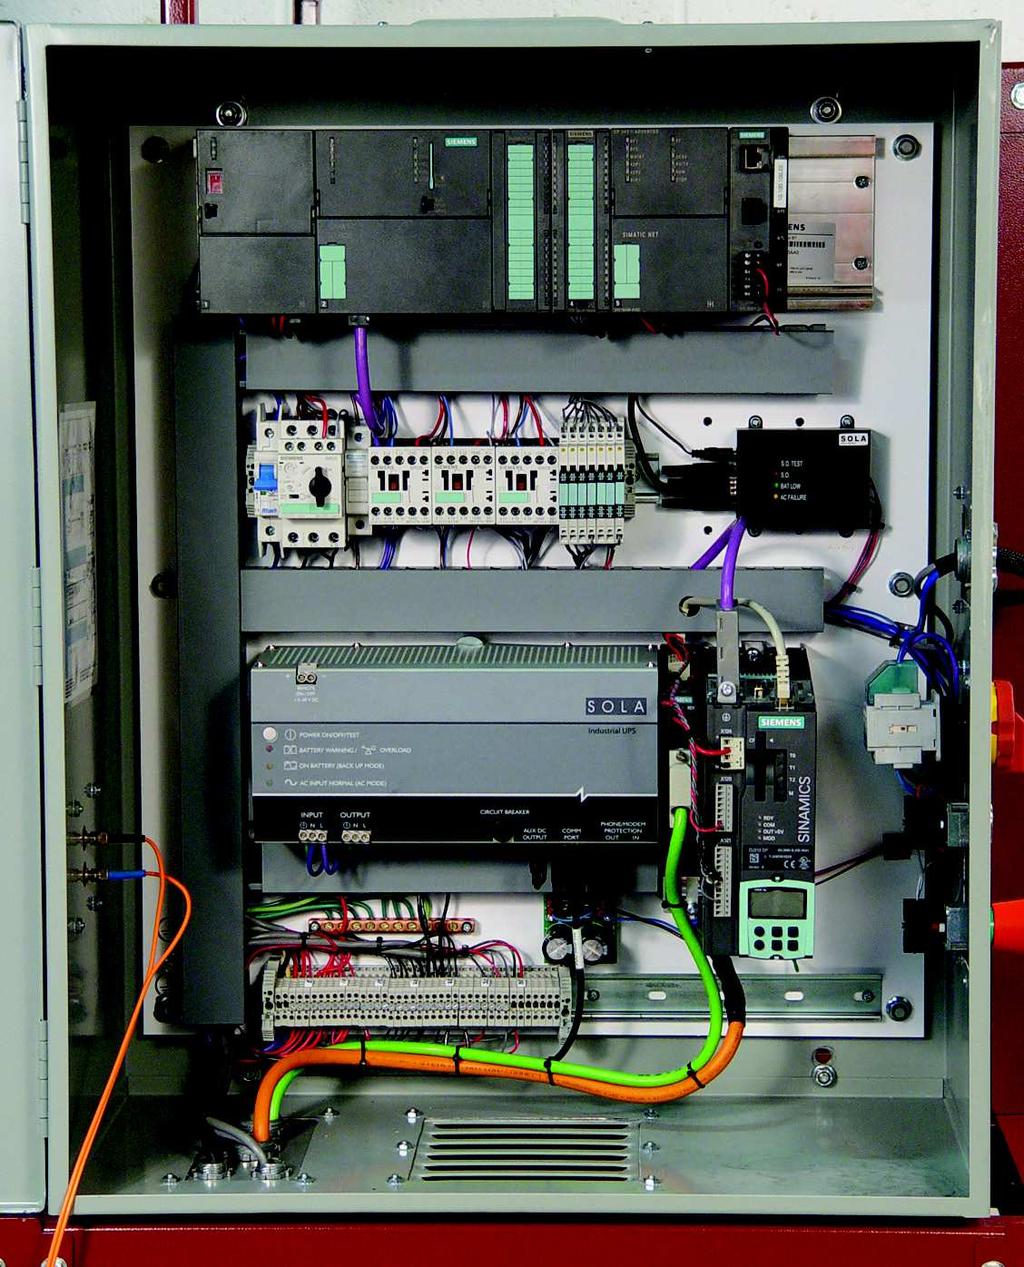 Job Sheet 1 Electrical Panel Familiarization The Wind Turbine Training System: Electrical Pitch Hub hardware has an electrical enclosure that houses an electrical panel.